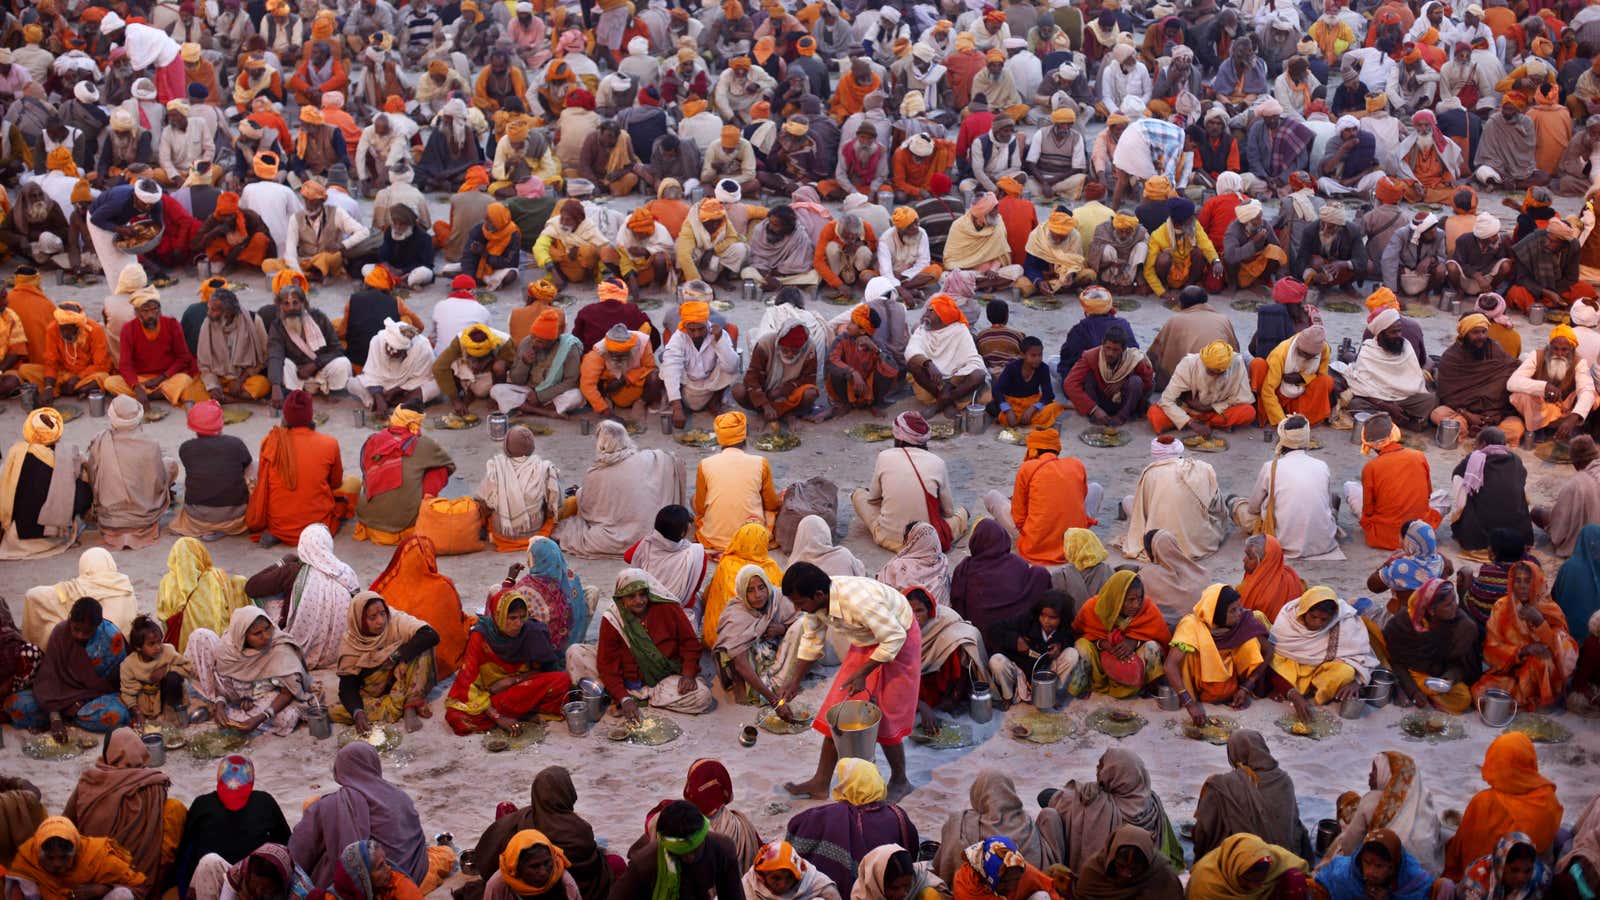 Food being distributed during the Maha Kumbh festival.